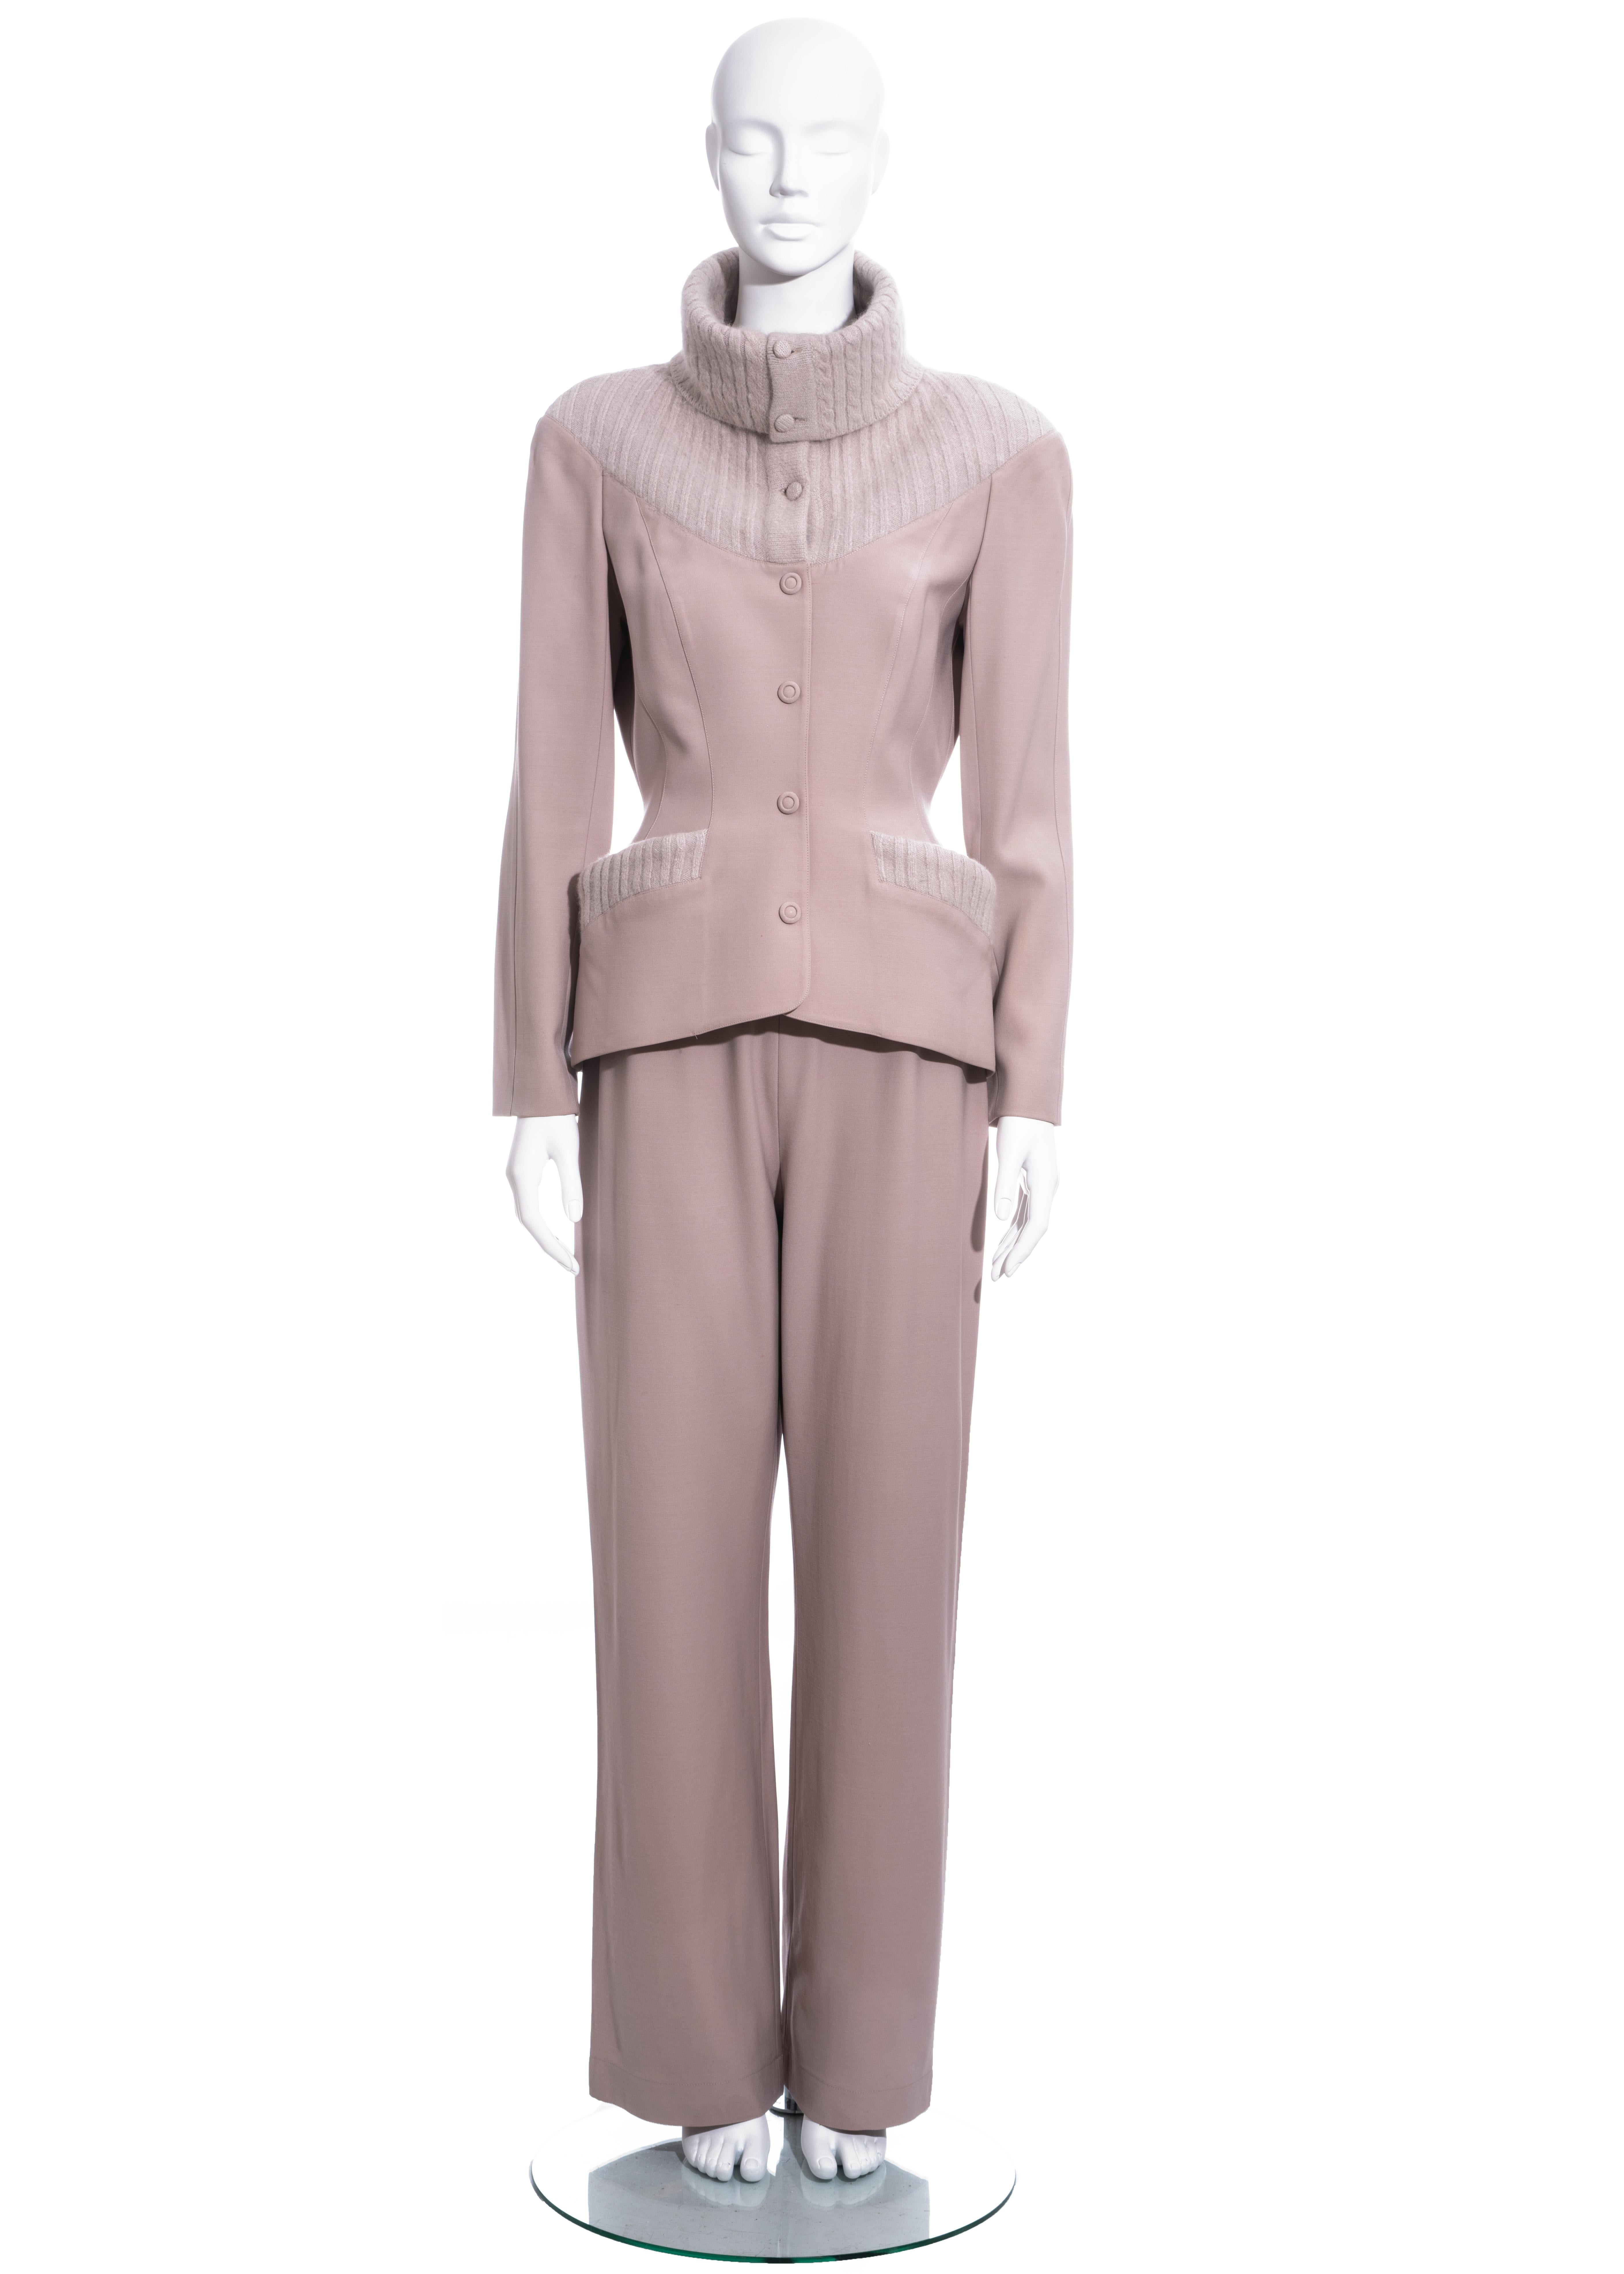 ▪ Thierry Mugler dusty pink pant suit
▪ 100% Wool
▪ Knitted turtle neck, yoke and trim
▪ Fabric cover buttons with hidden snap closure 
▪ Accentuated waist
▪ Straight-leg pants
▪ FR 42 - UK 14 - US 10
▪ Fall-Winter 1999